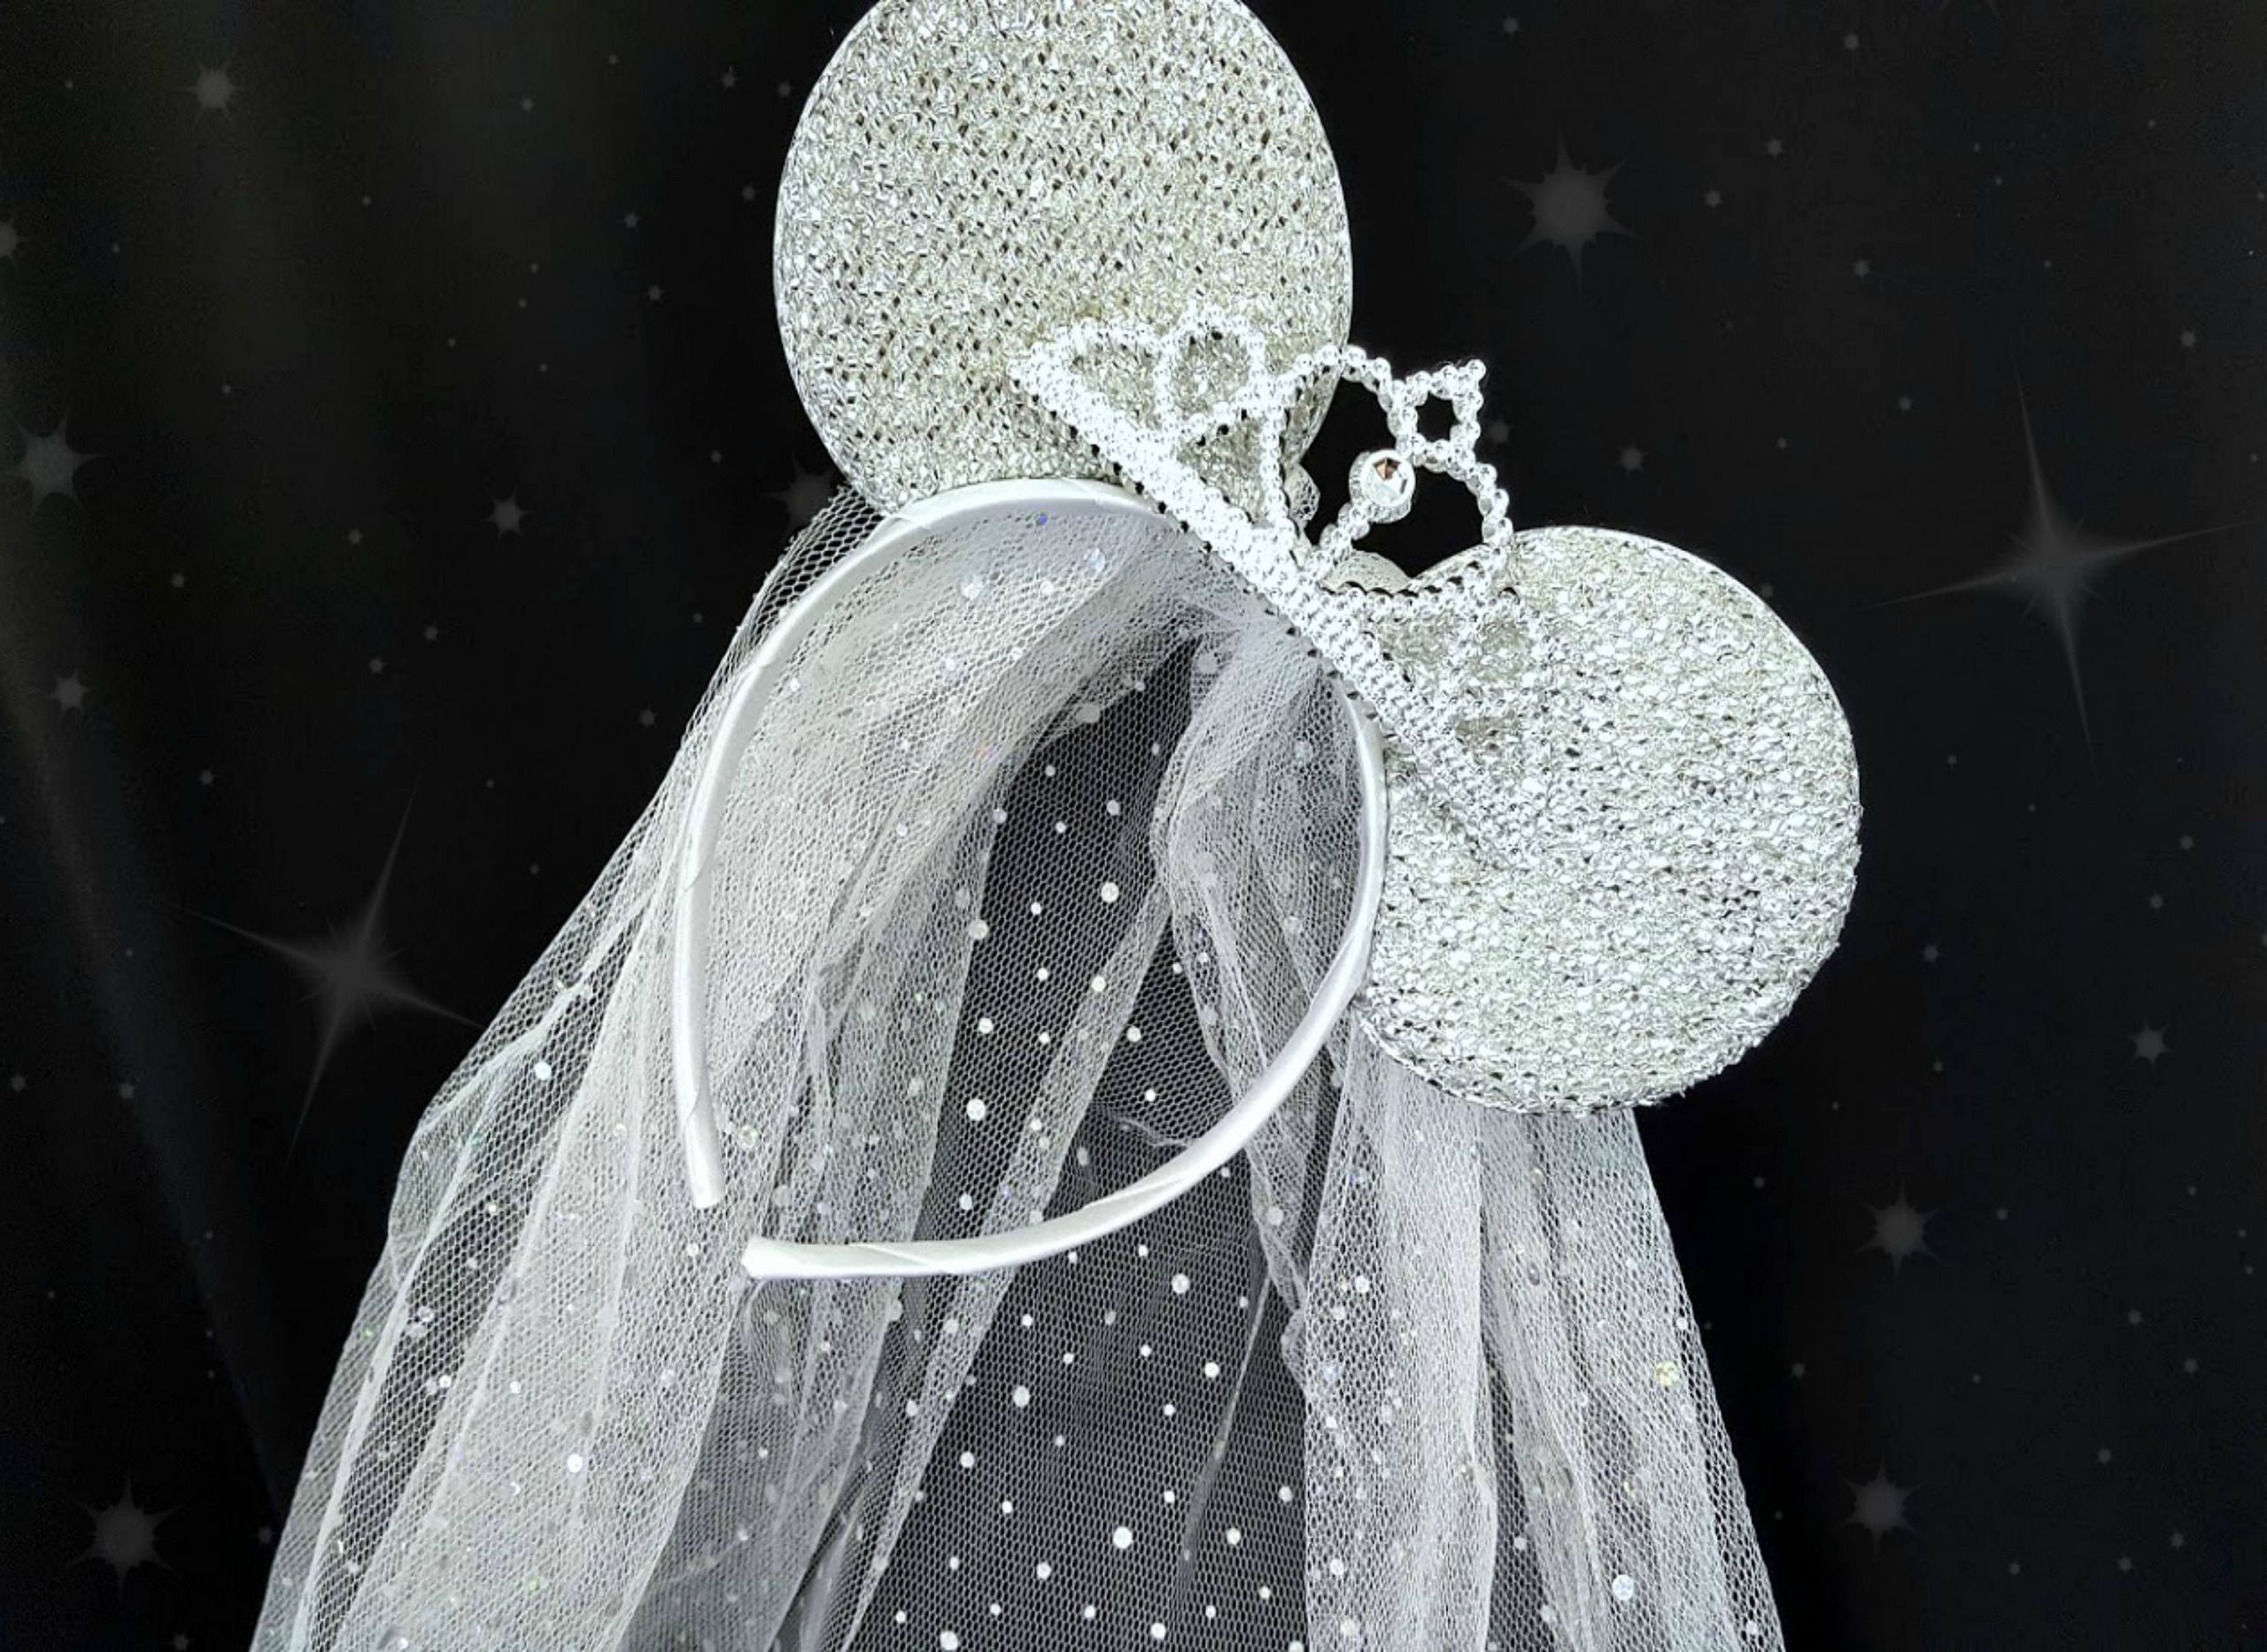 Make Your Own Wedding Veil
 Design Your Own Disney Inspired Bridal Veil Minnie Mouse Ears